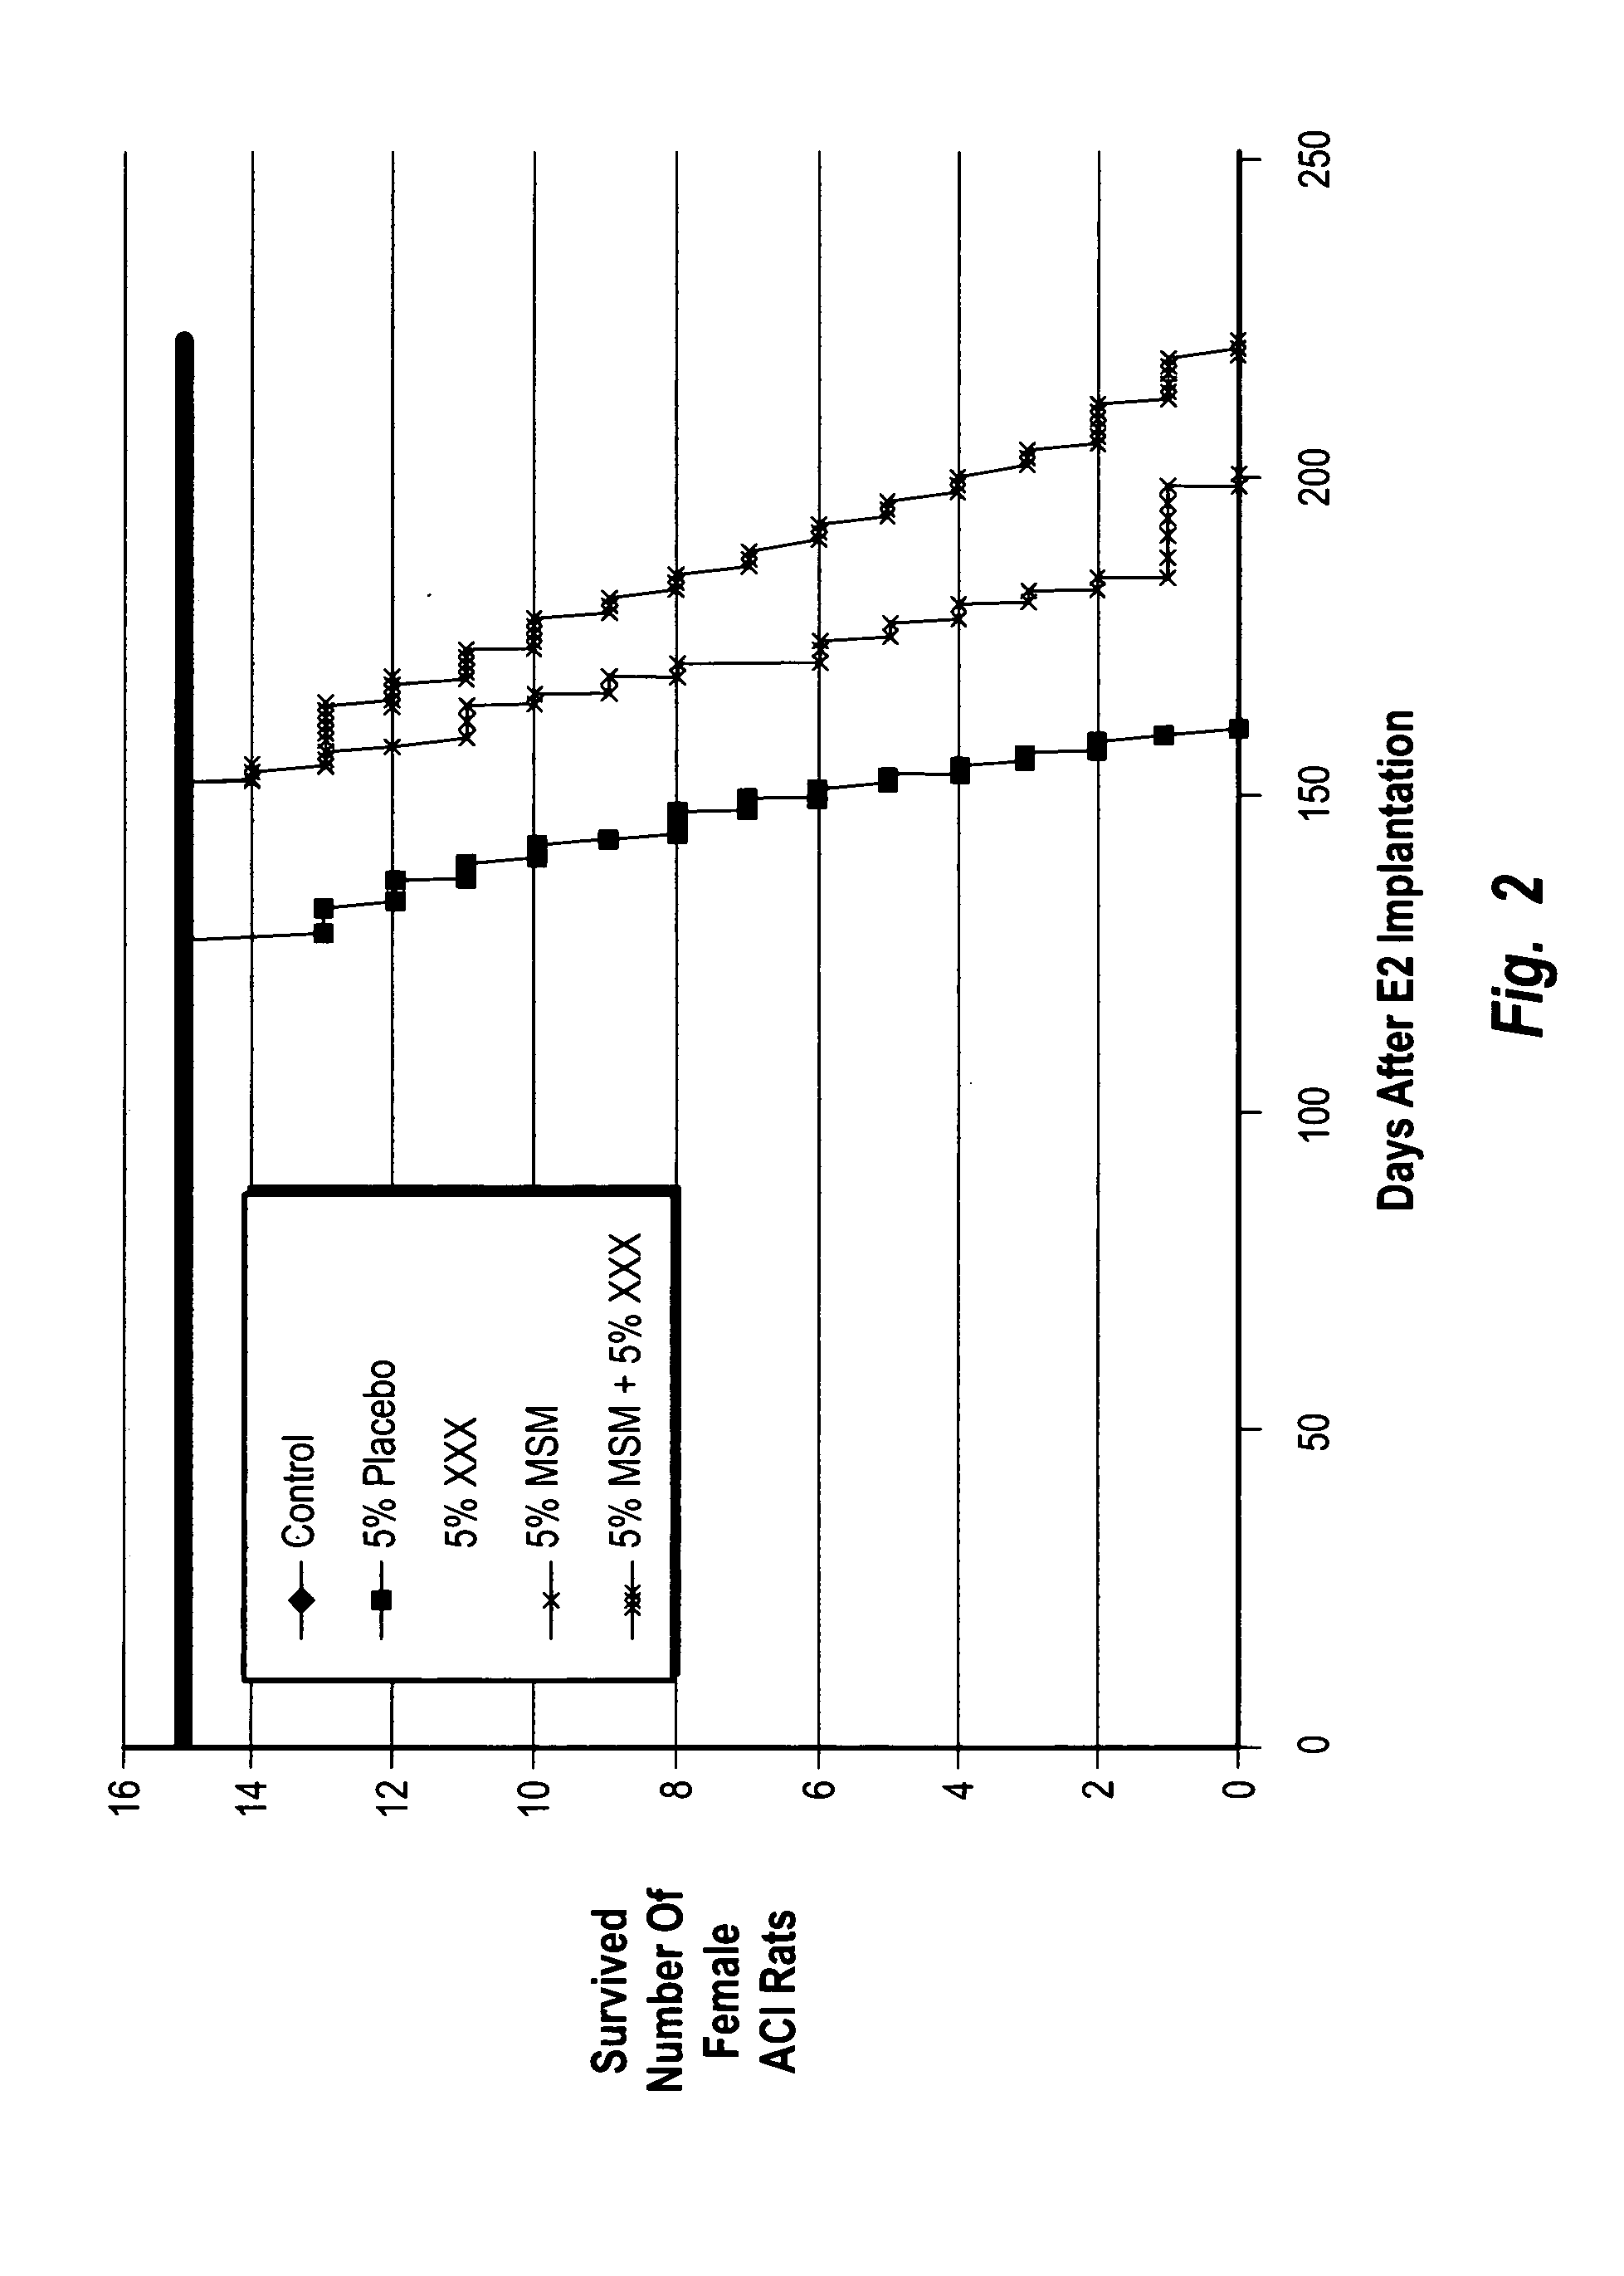 Formulations and methods for treating breast cancer with Morinda citrifolia and methylsulfonymethane